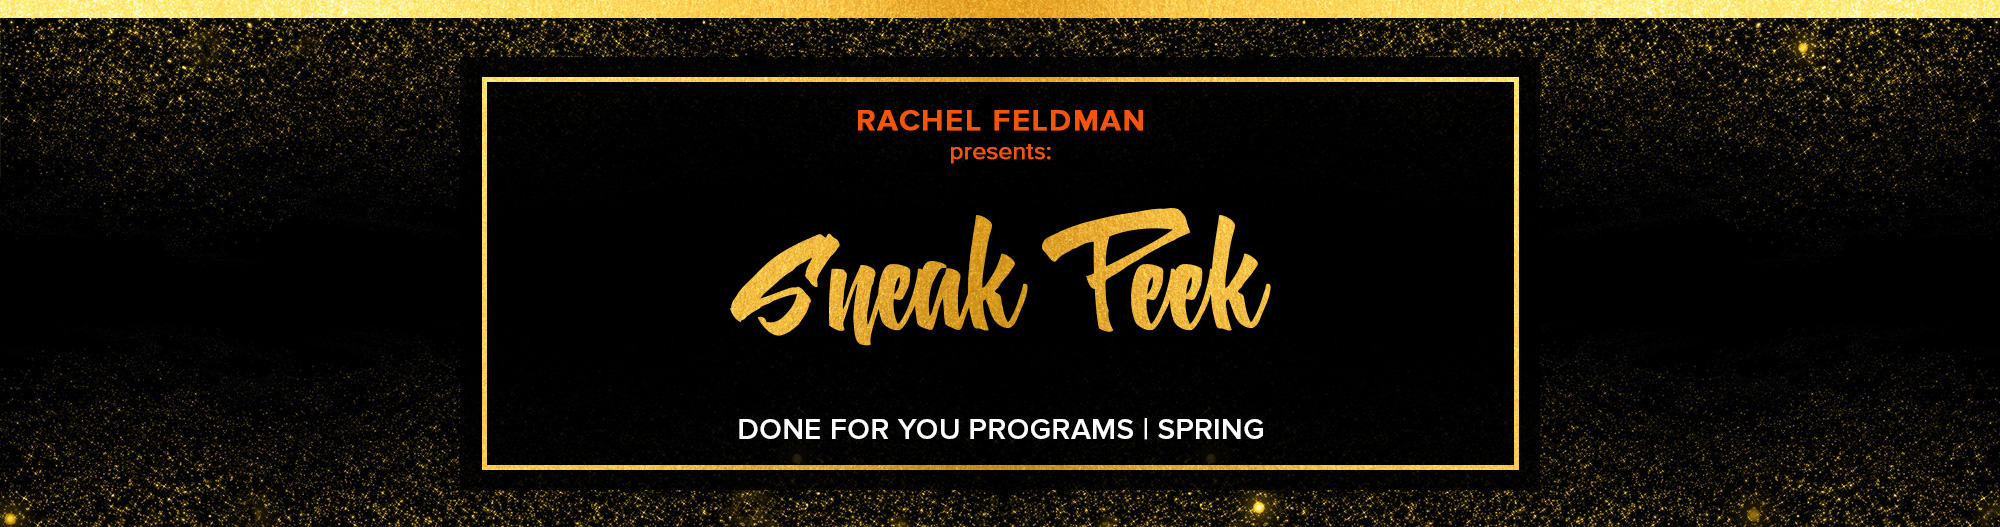 Done For You Programs for Health Coaches Sneak Peek